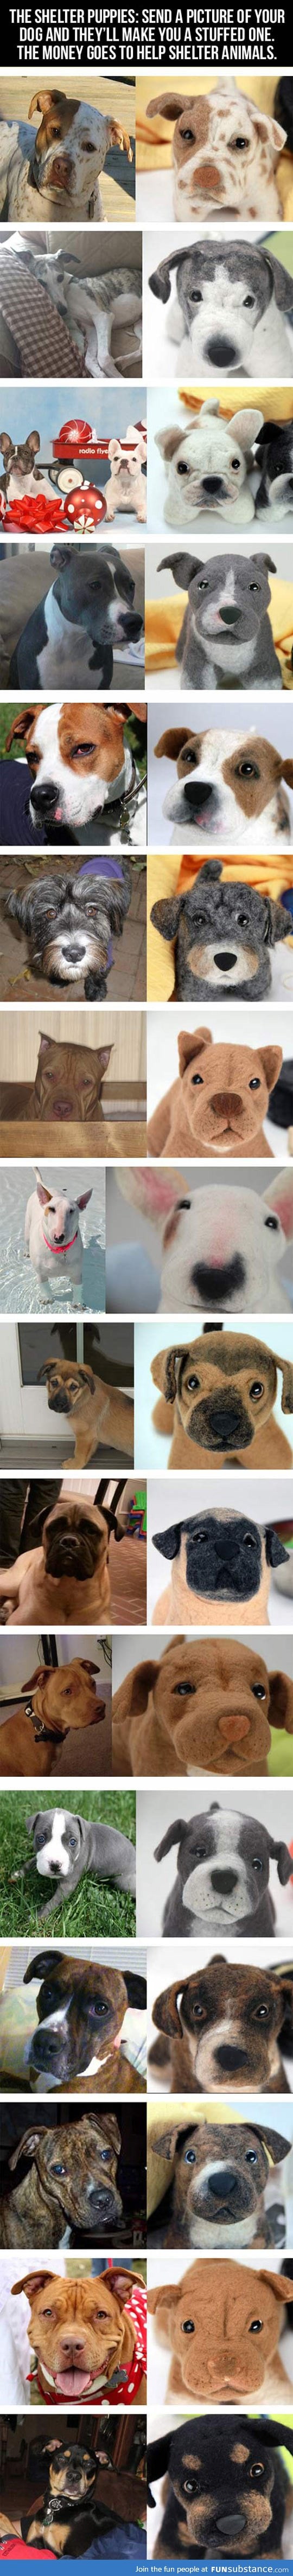 Dogs and their stuffed animal form